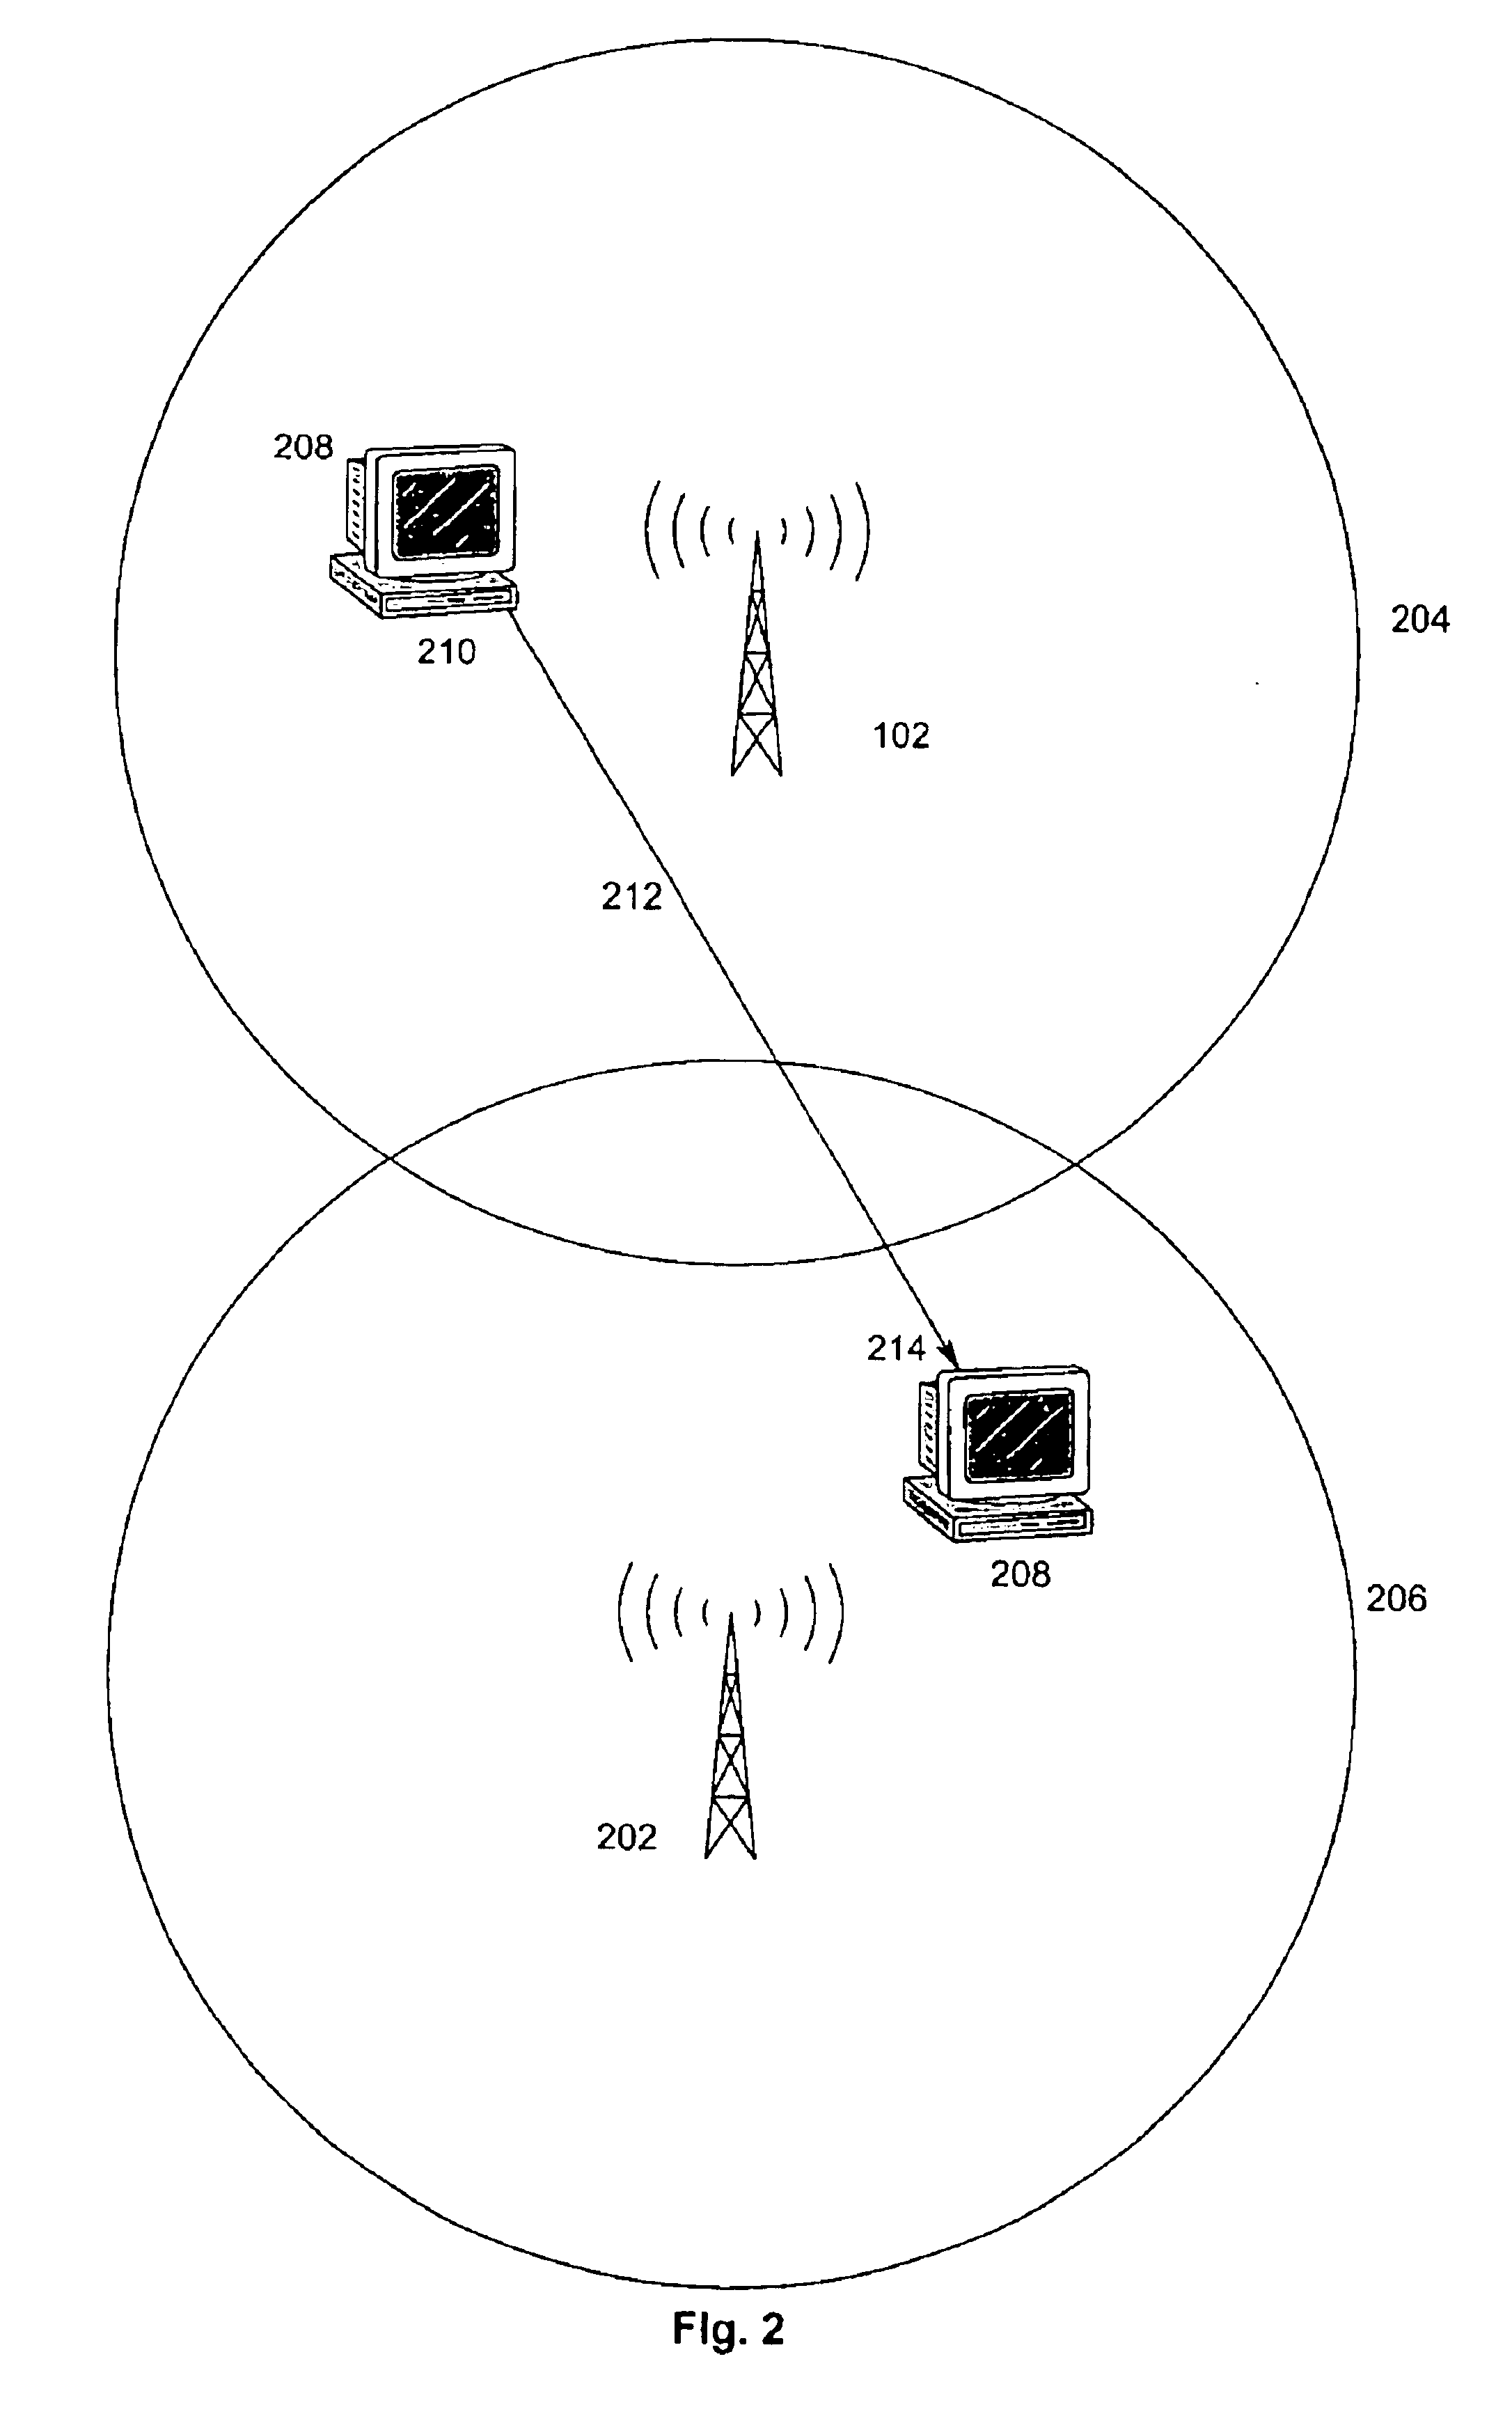 Method for grouping 802.11 stations into authorized service sets to differentiate network access and services